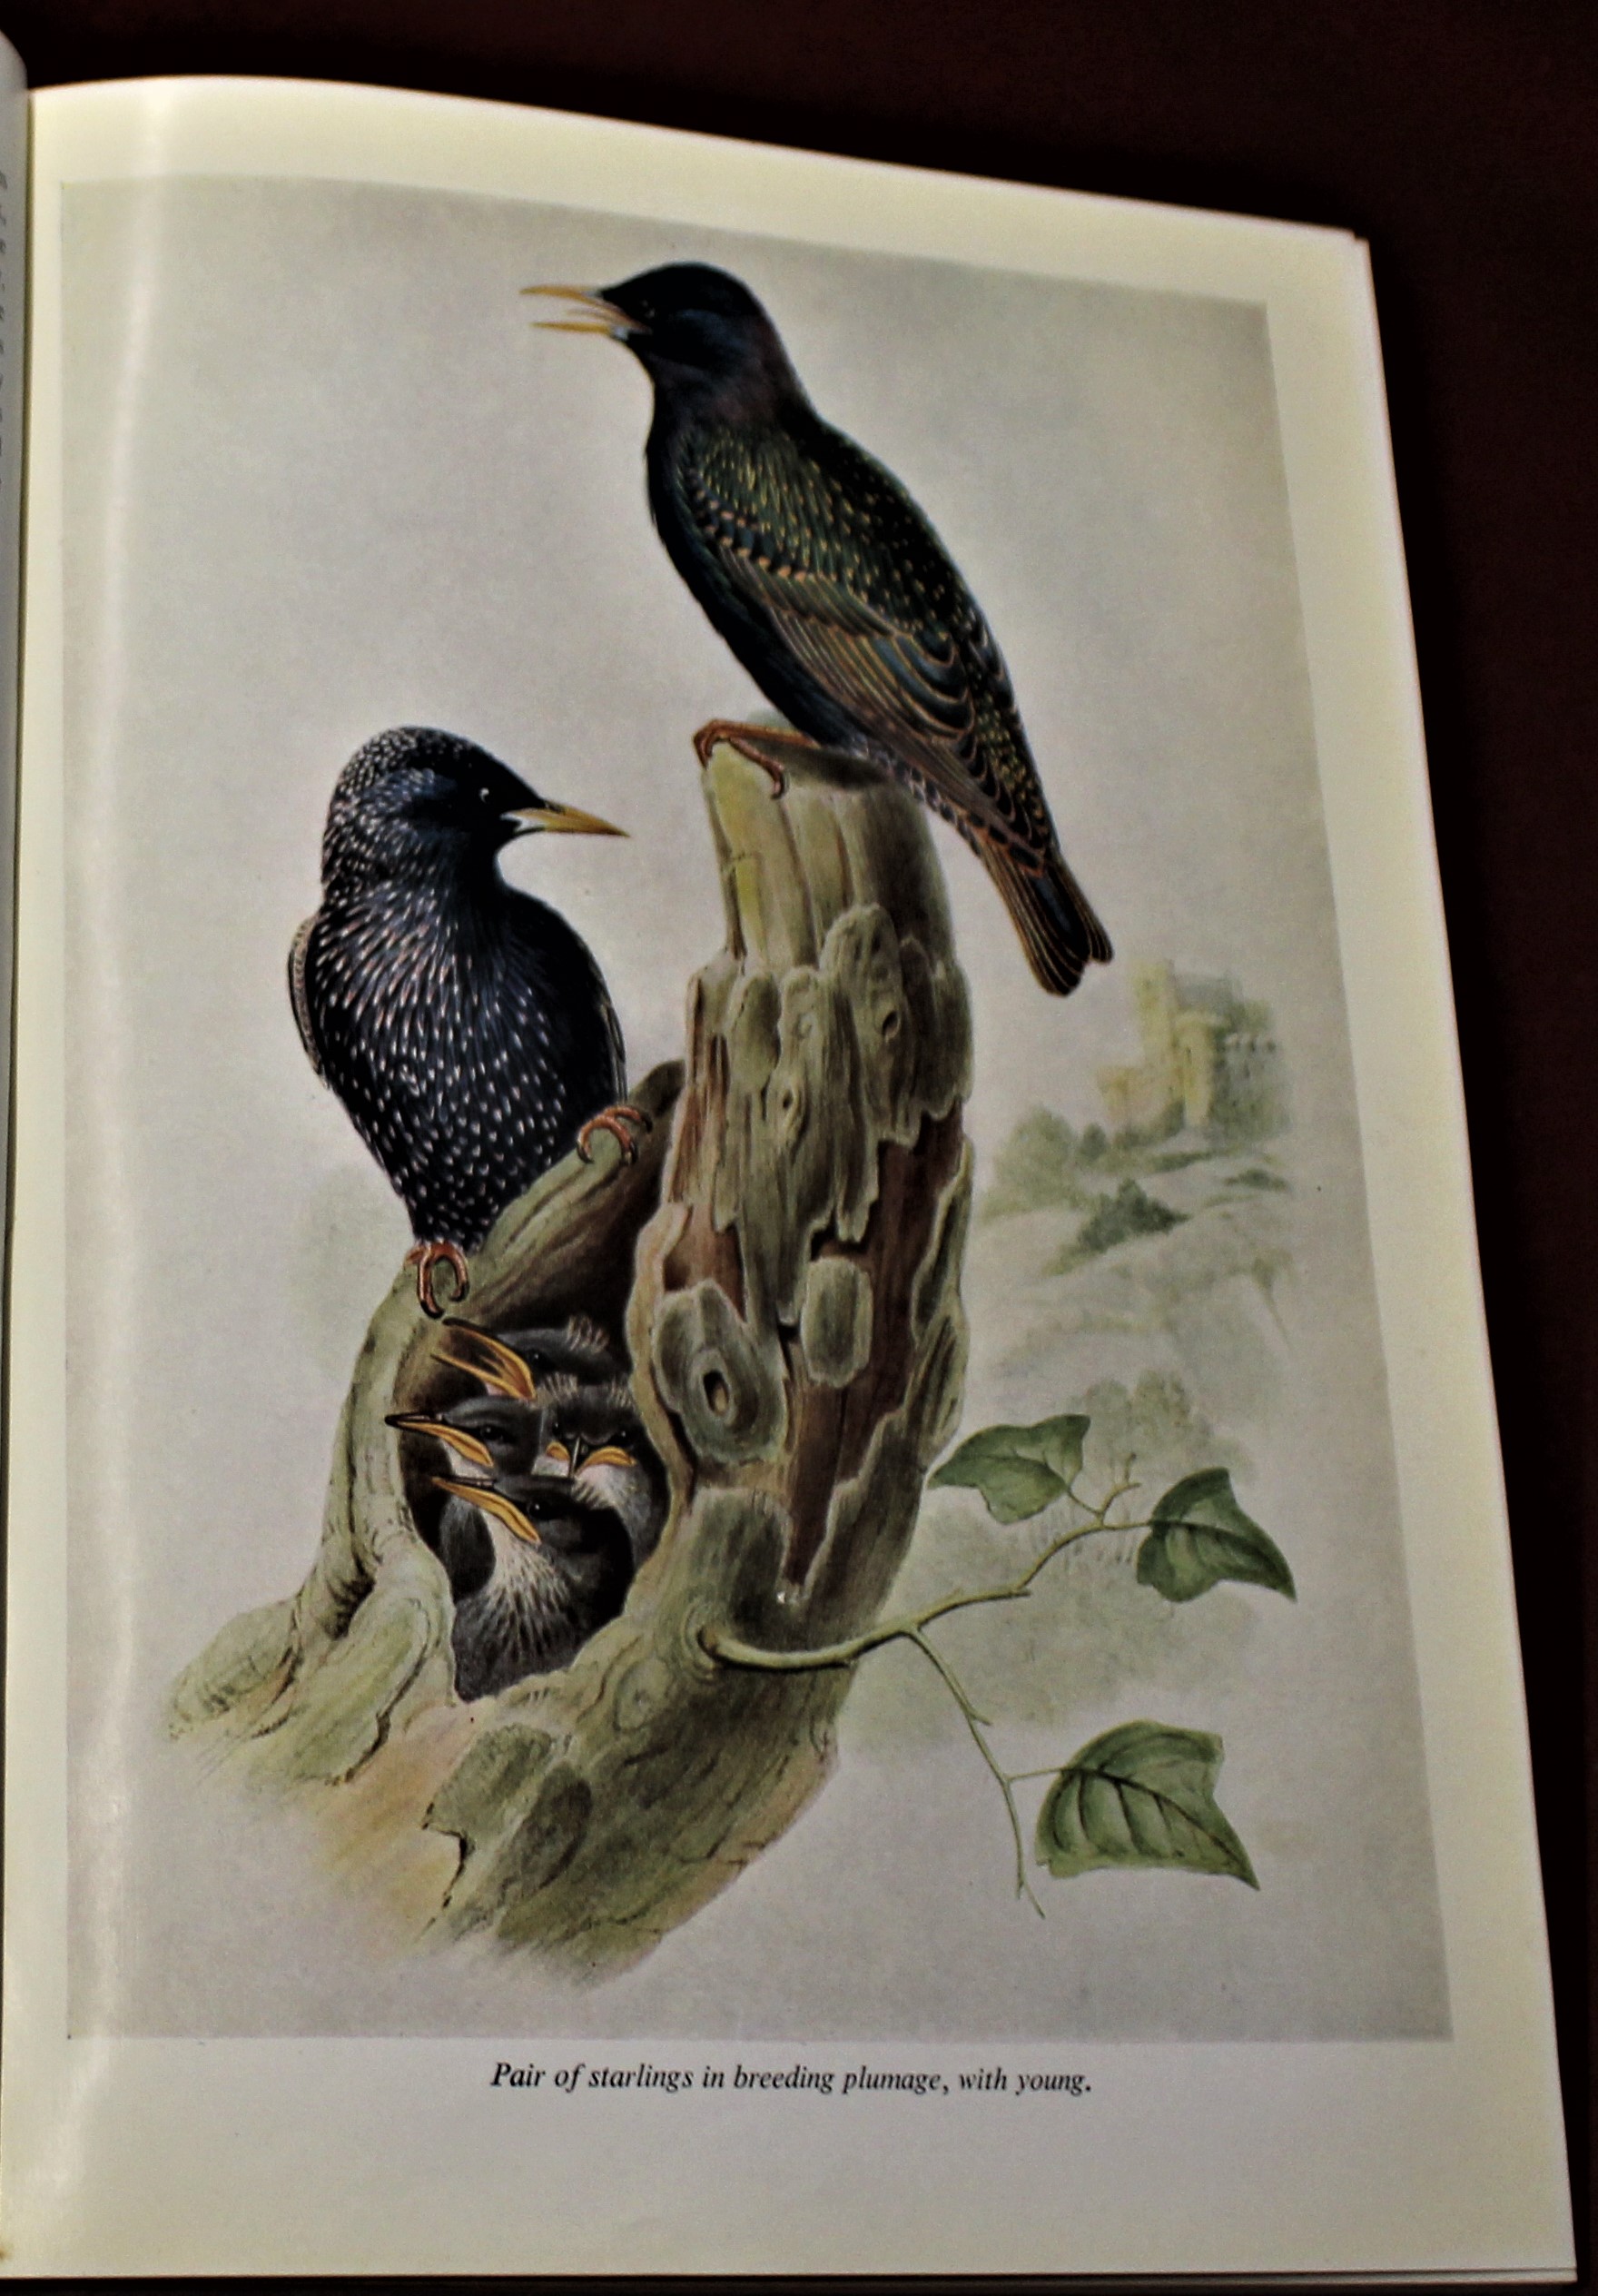 Book-British Birds in colour by R.S.R. Fitter- includes 108 colour plates from John Gord's 'The - Image 3 of 4